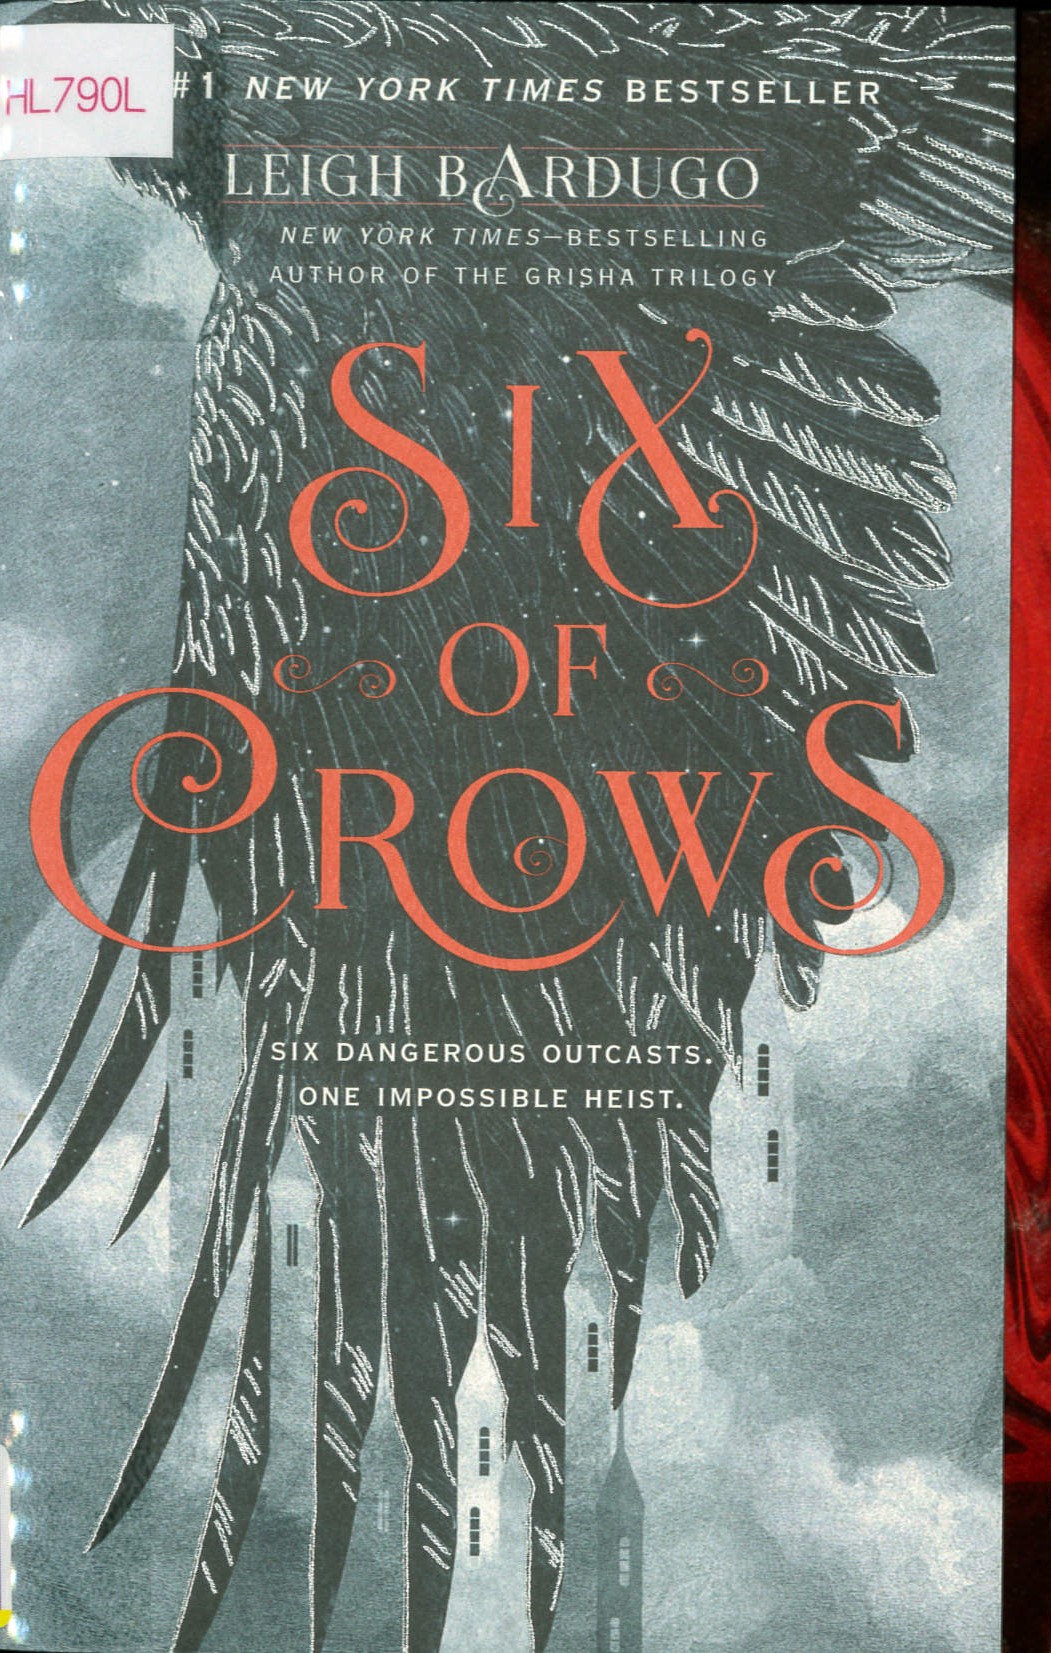 Six of crows /